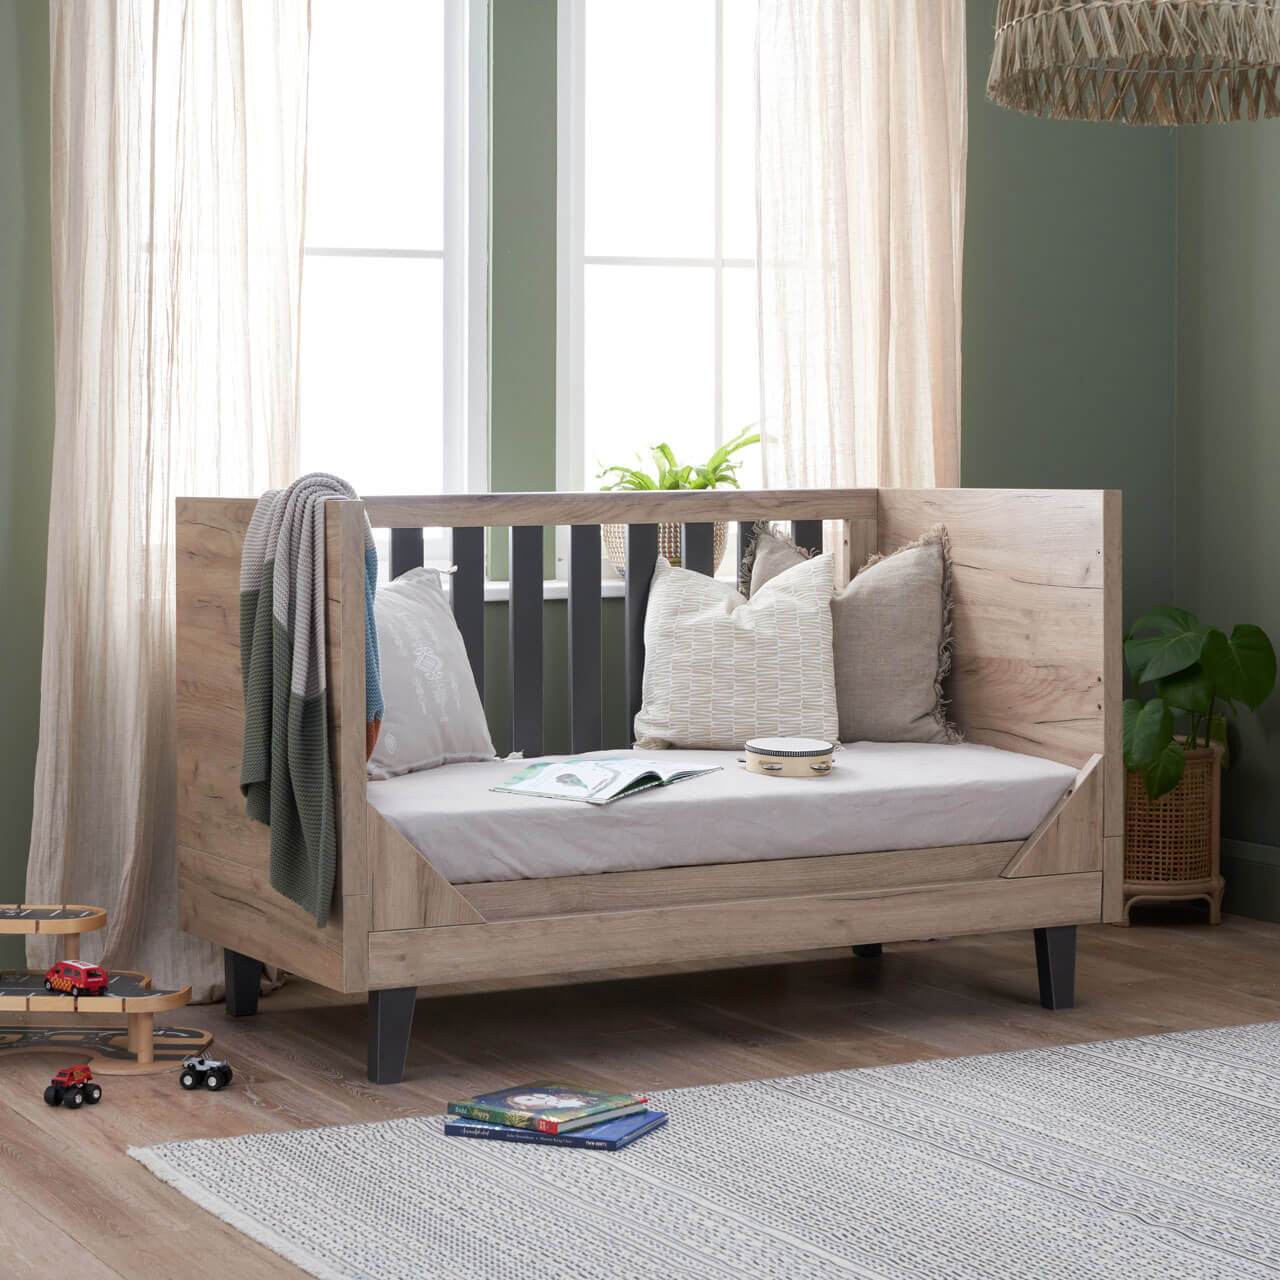 Tutti Bambini Como Cot Bed - Distressed Oak / Slate Grey -  | For Your Little One